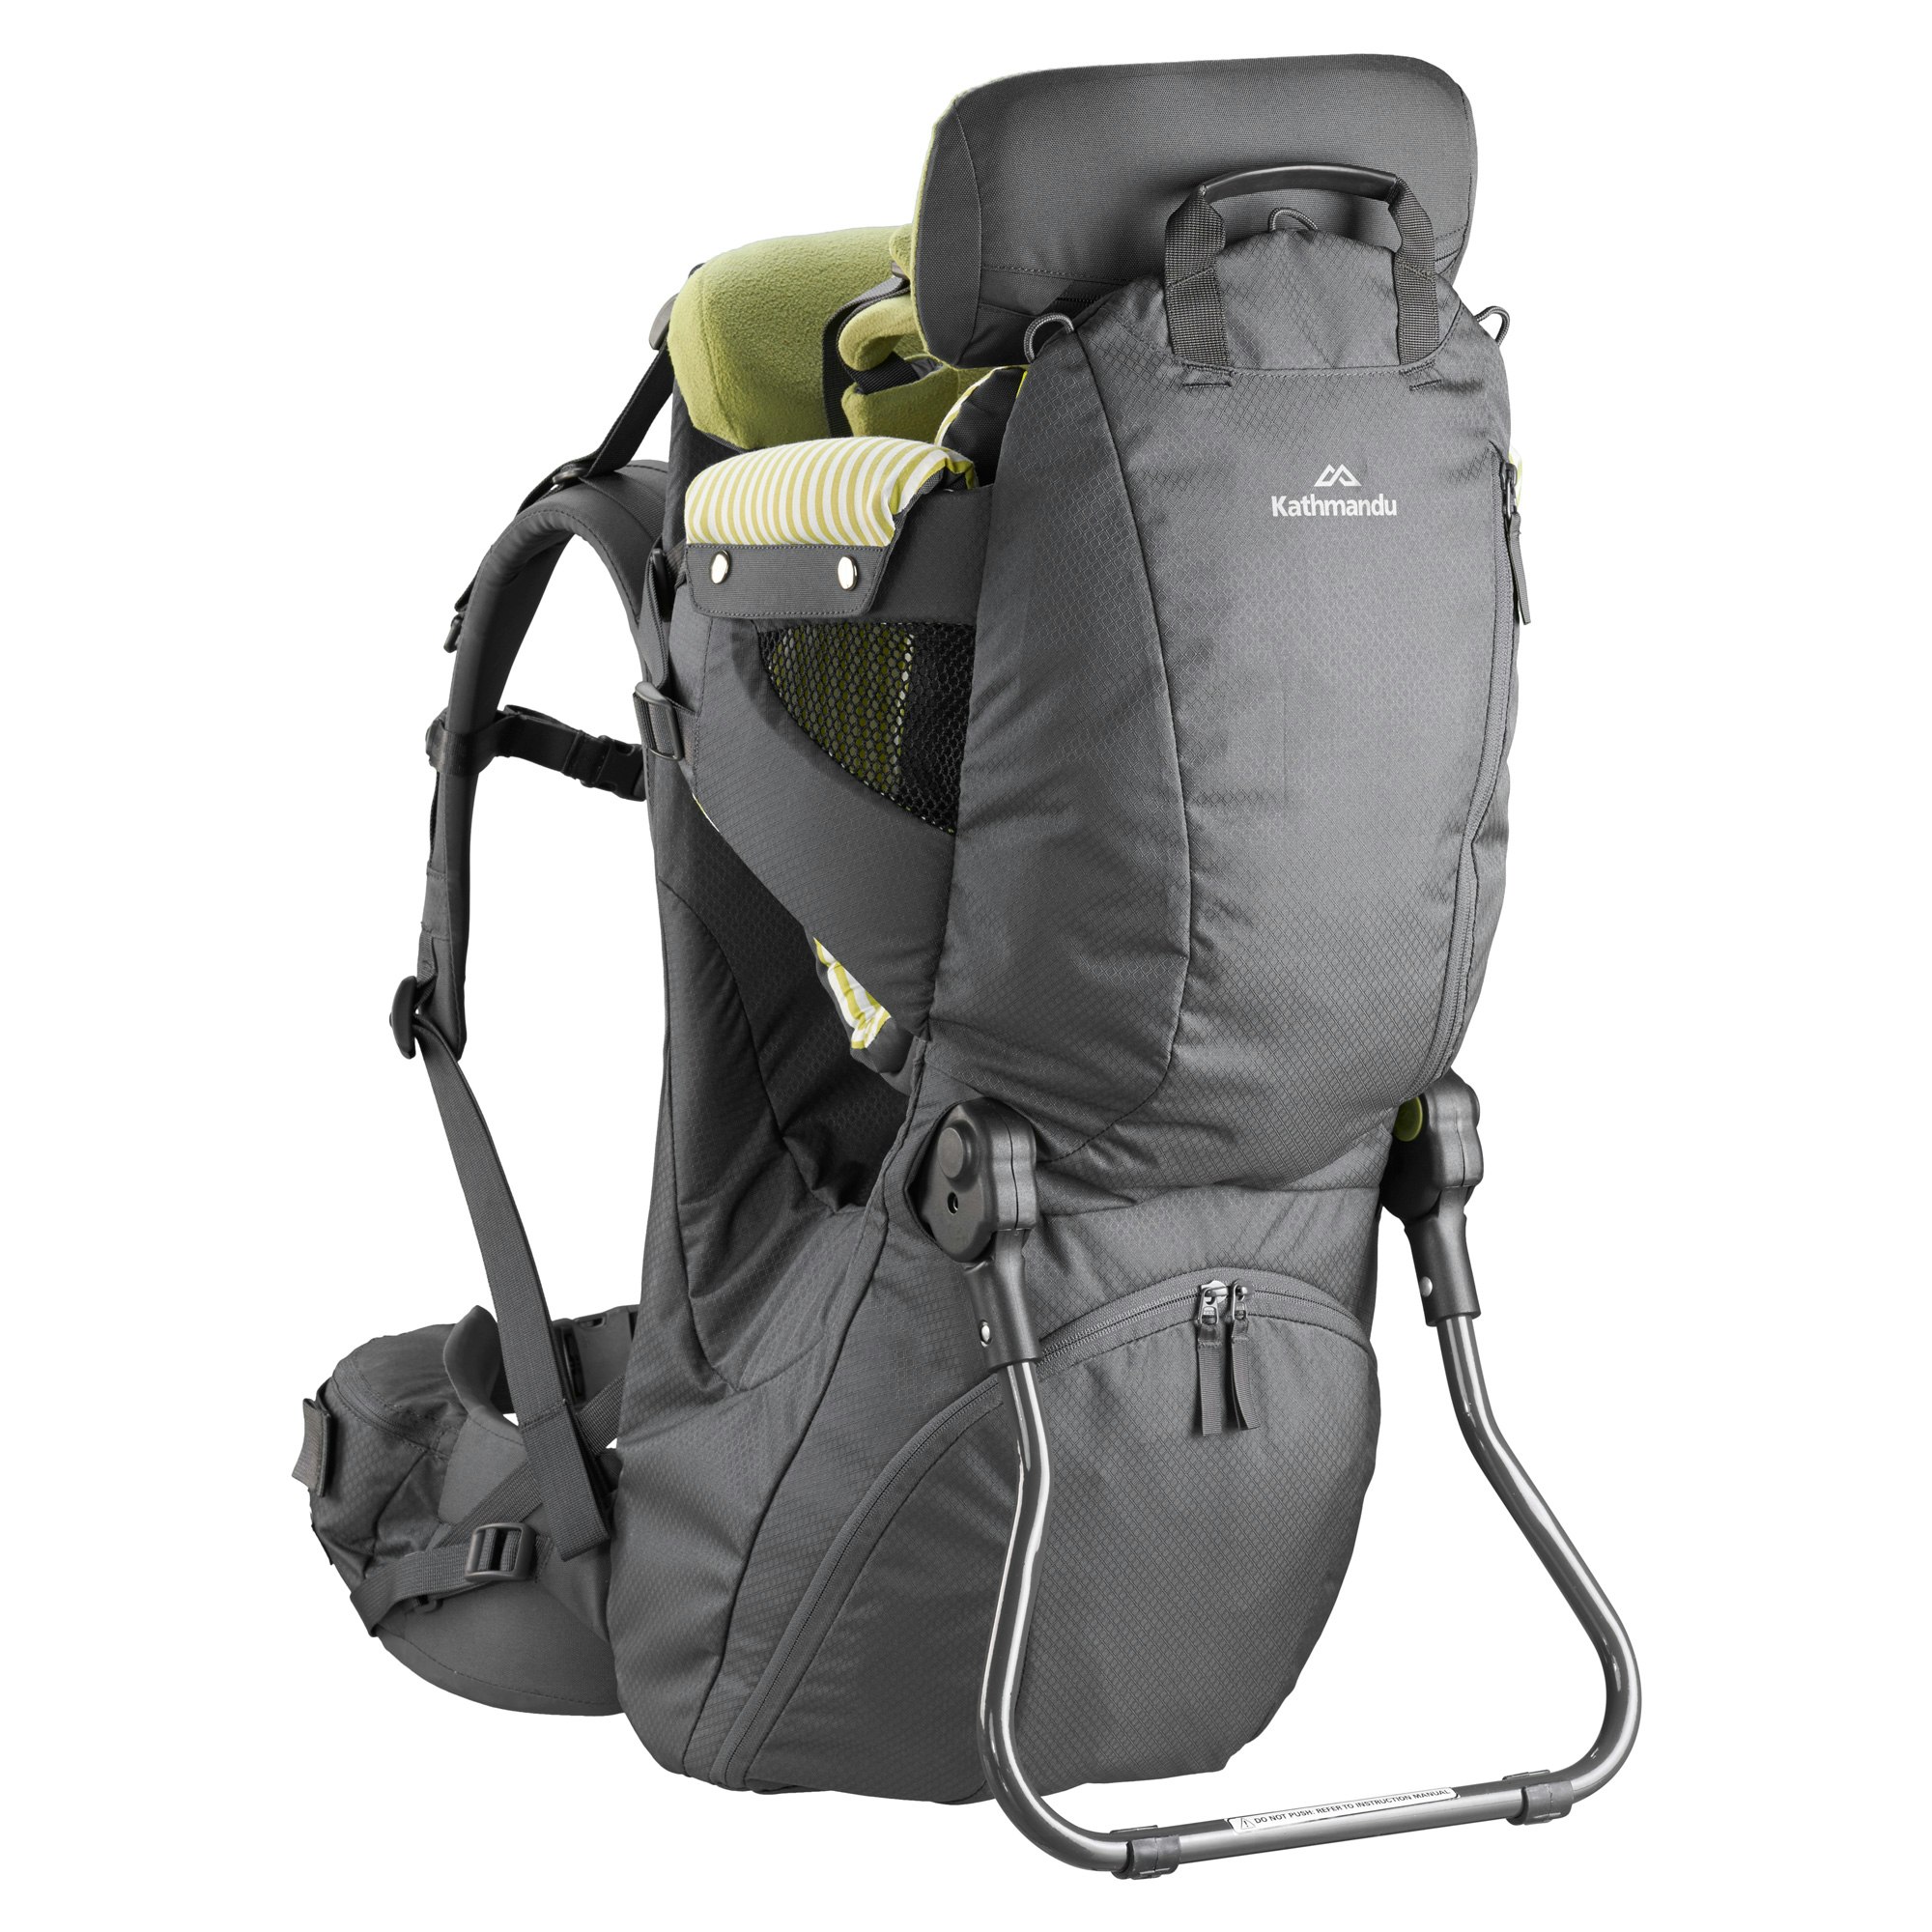 toddler hiking carrier sale